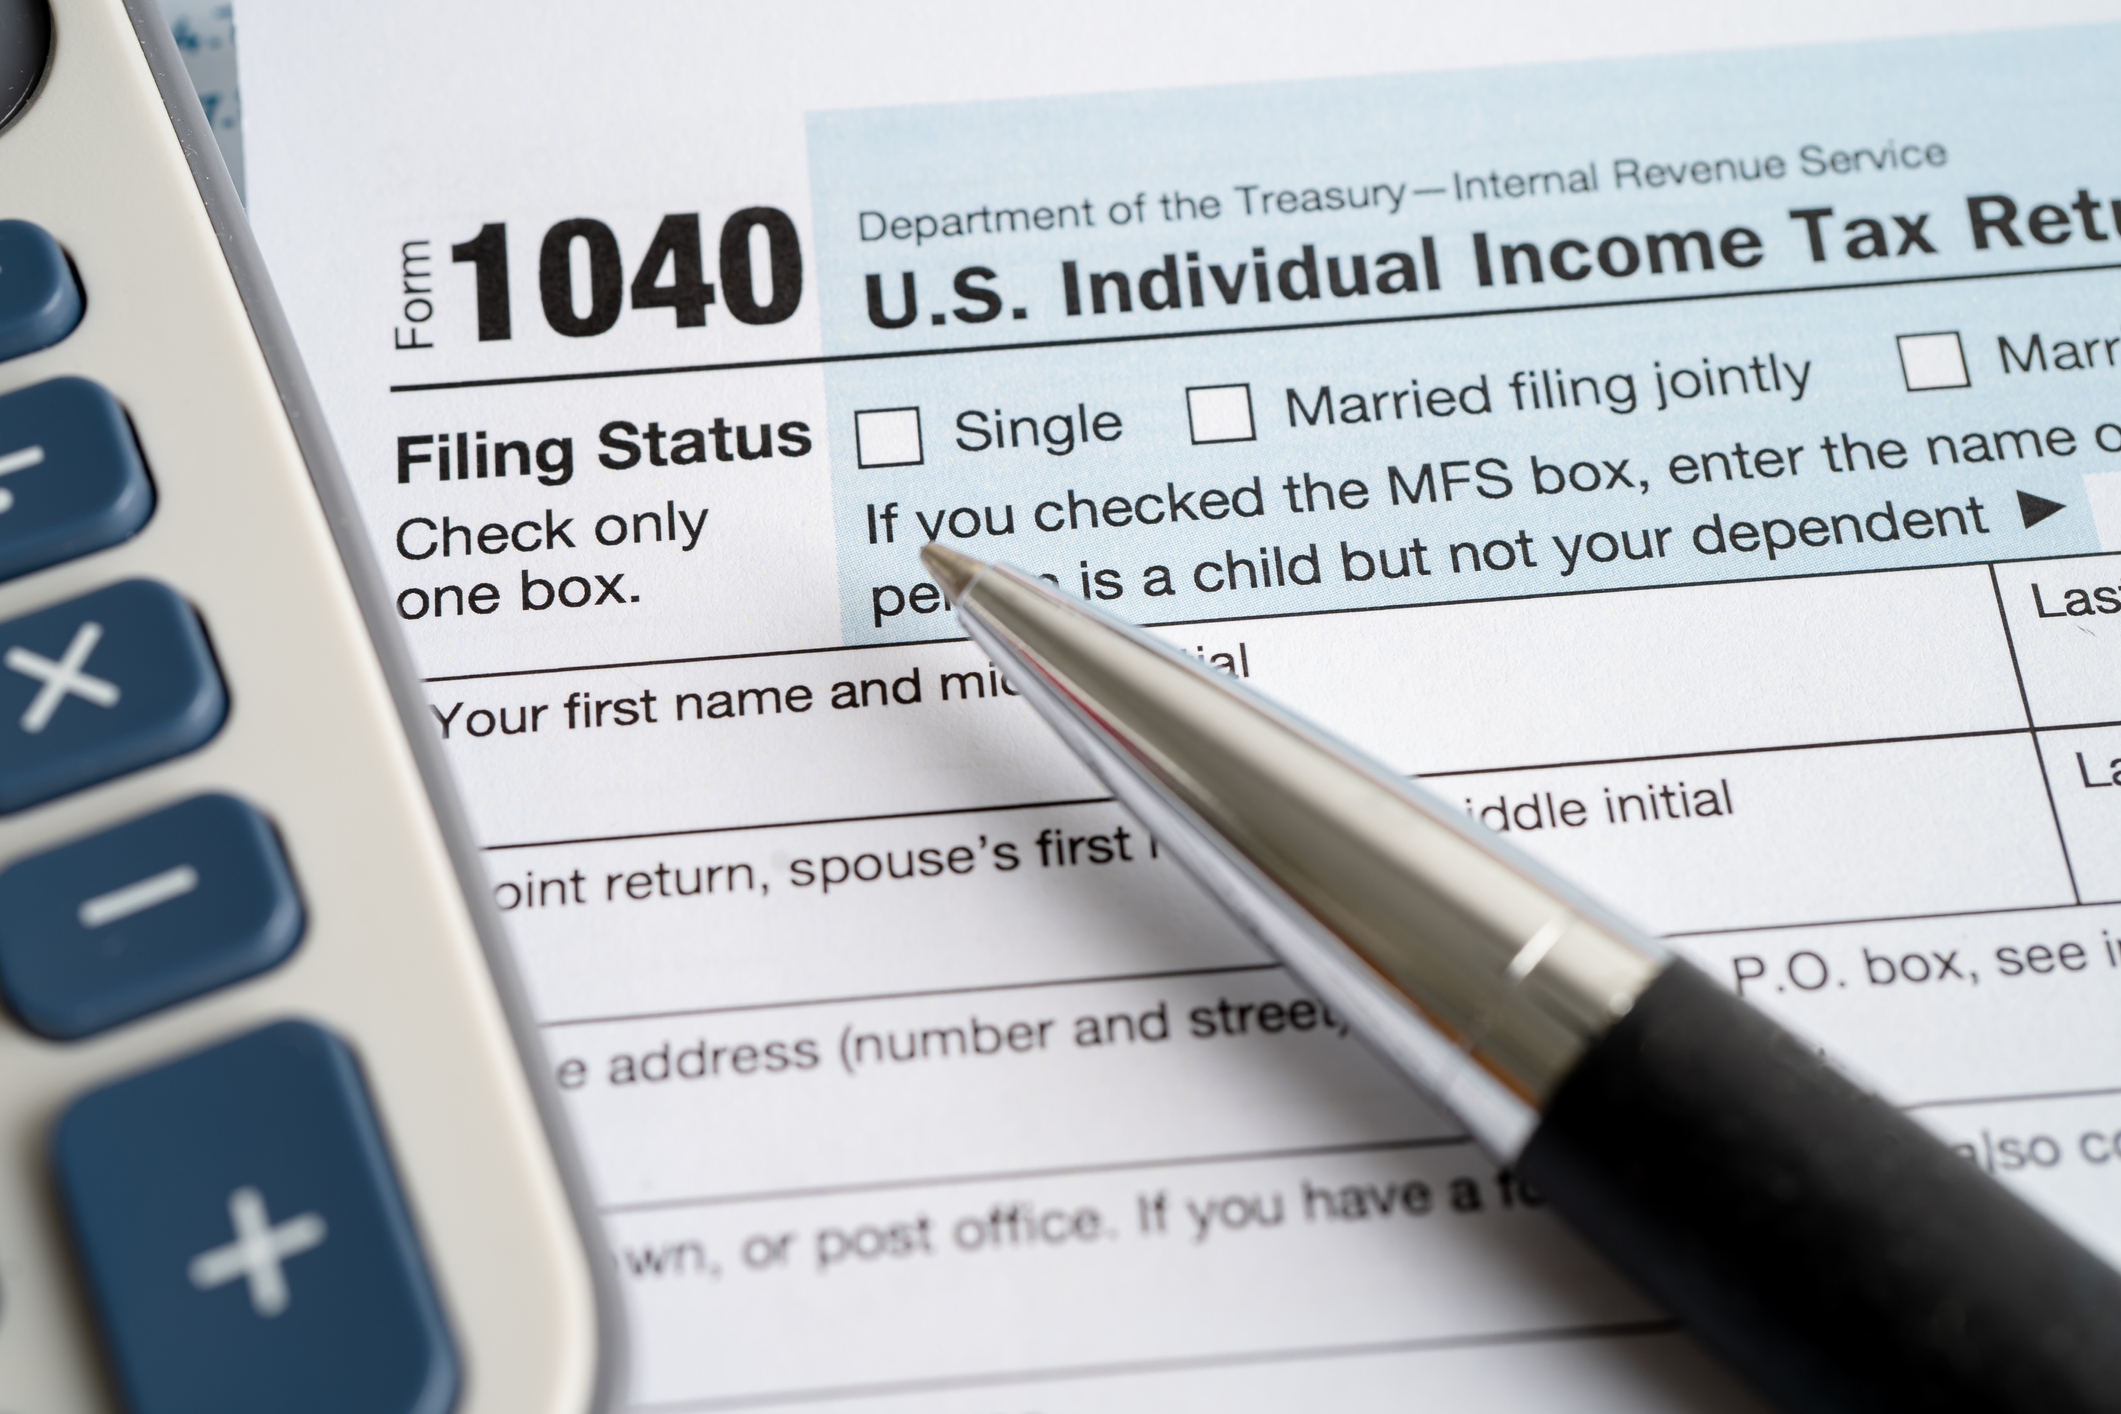 Free Tax Help Offered Through April